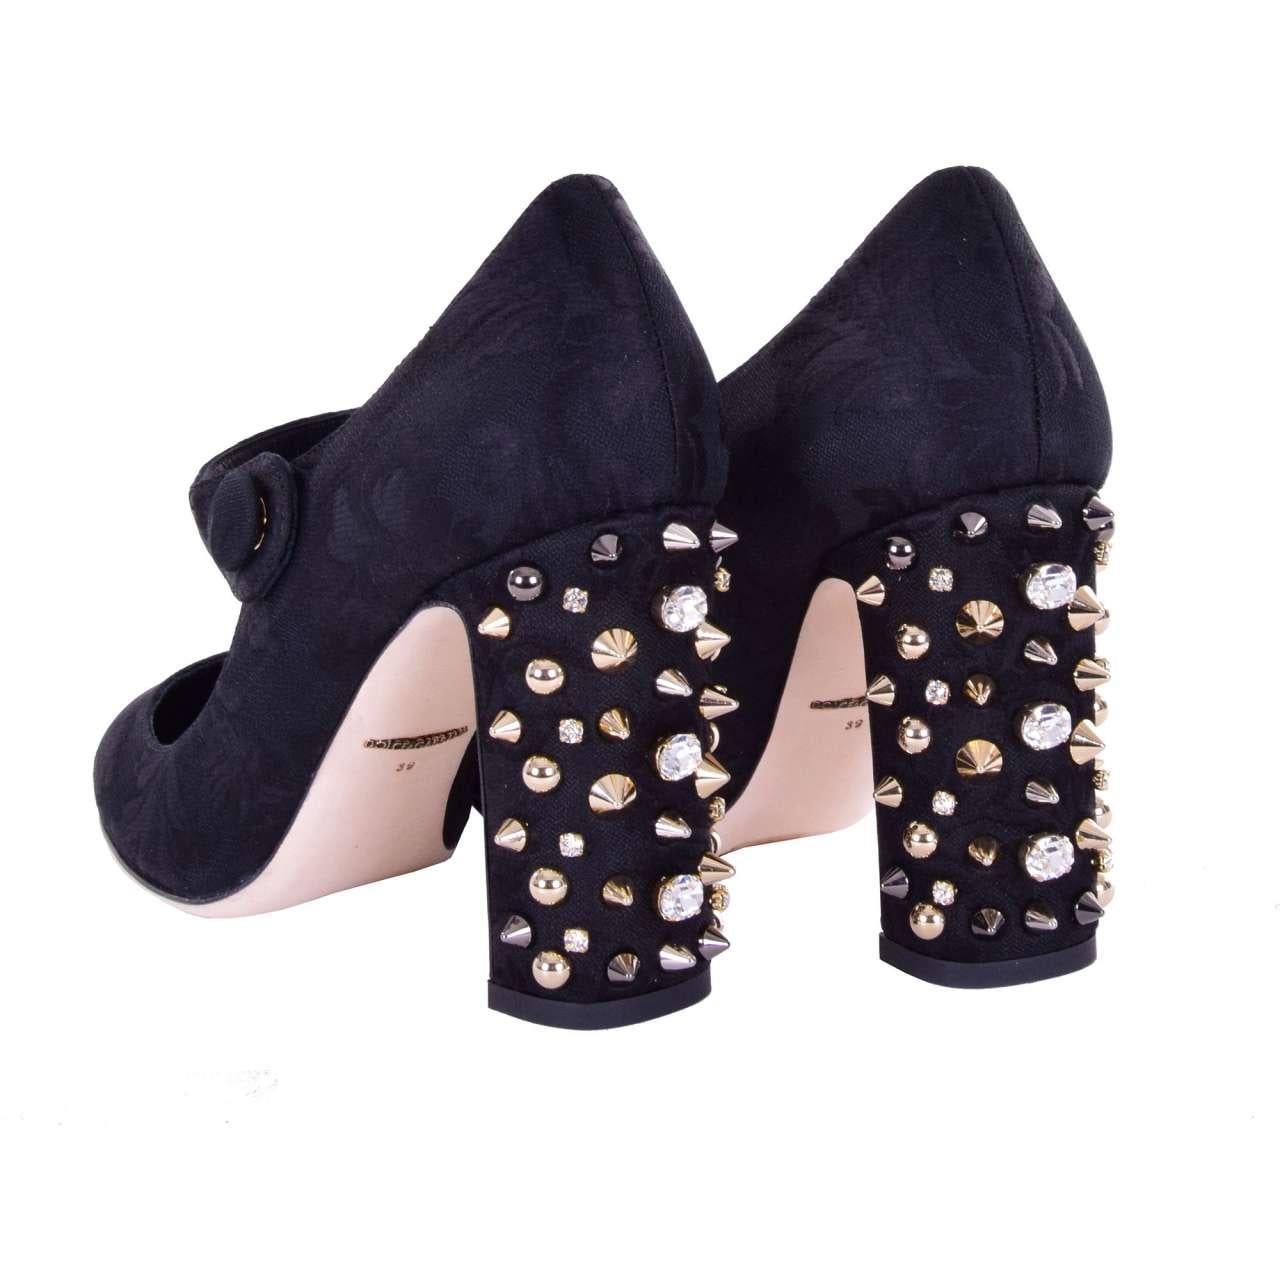 - Baroque Brocade Mary Jane Pumps VALLY with crystals and studs embellished heel in black by DOLCE & GABBANA Black Label - MADE IN ITALY - Former RRP: EUR 695 - New with Box - Model: CCD0647-AE652-80999 - Material: 69% Acetat, 27% Polyester, 4%